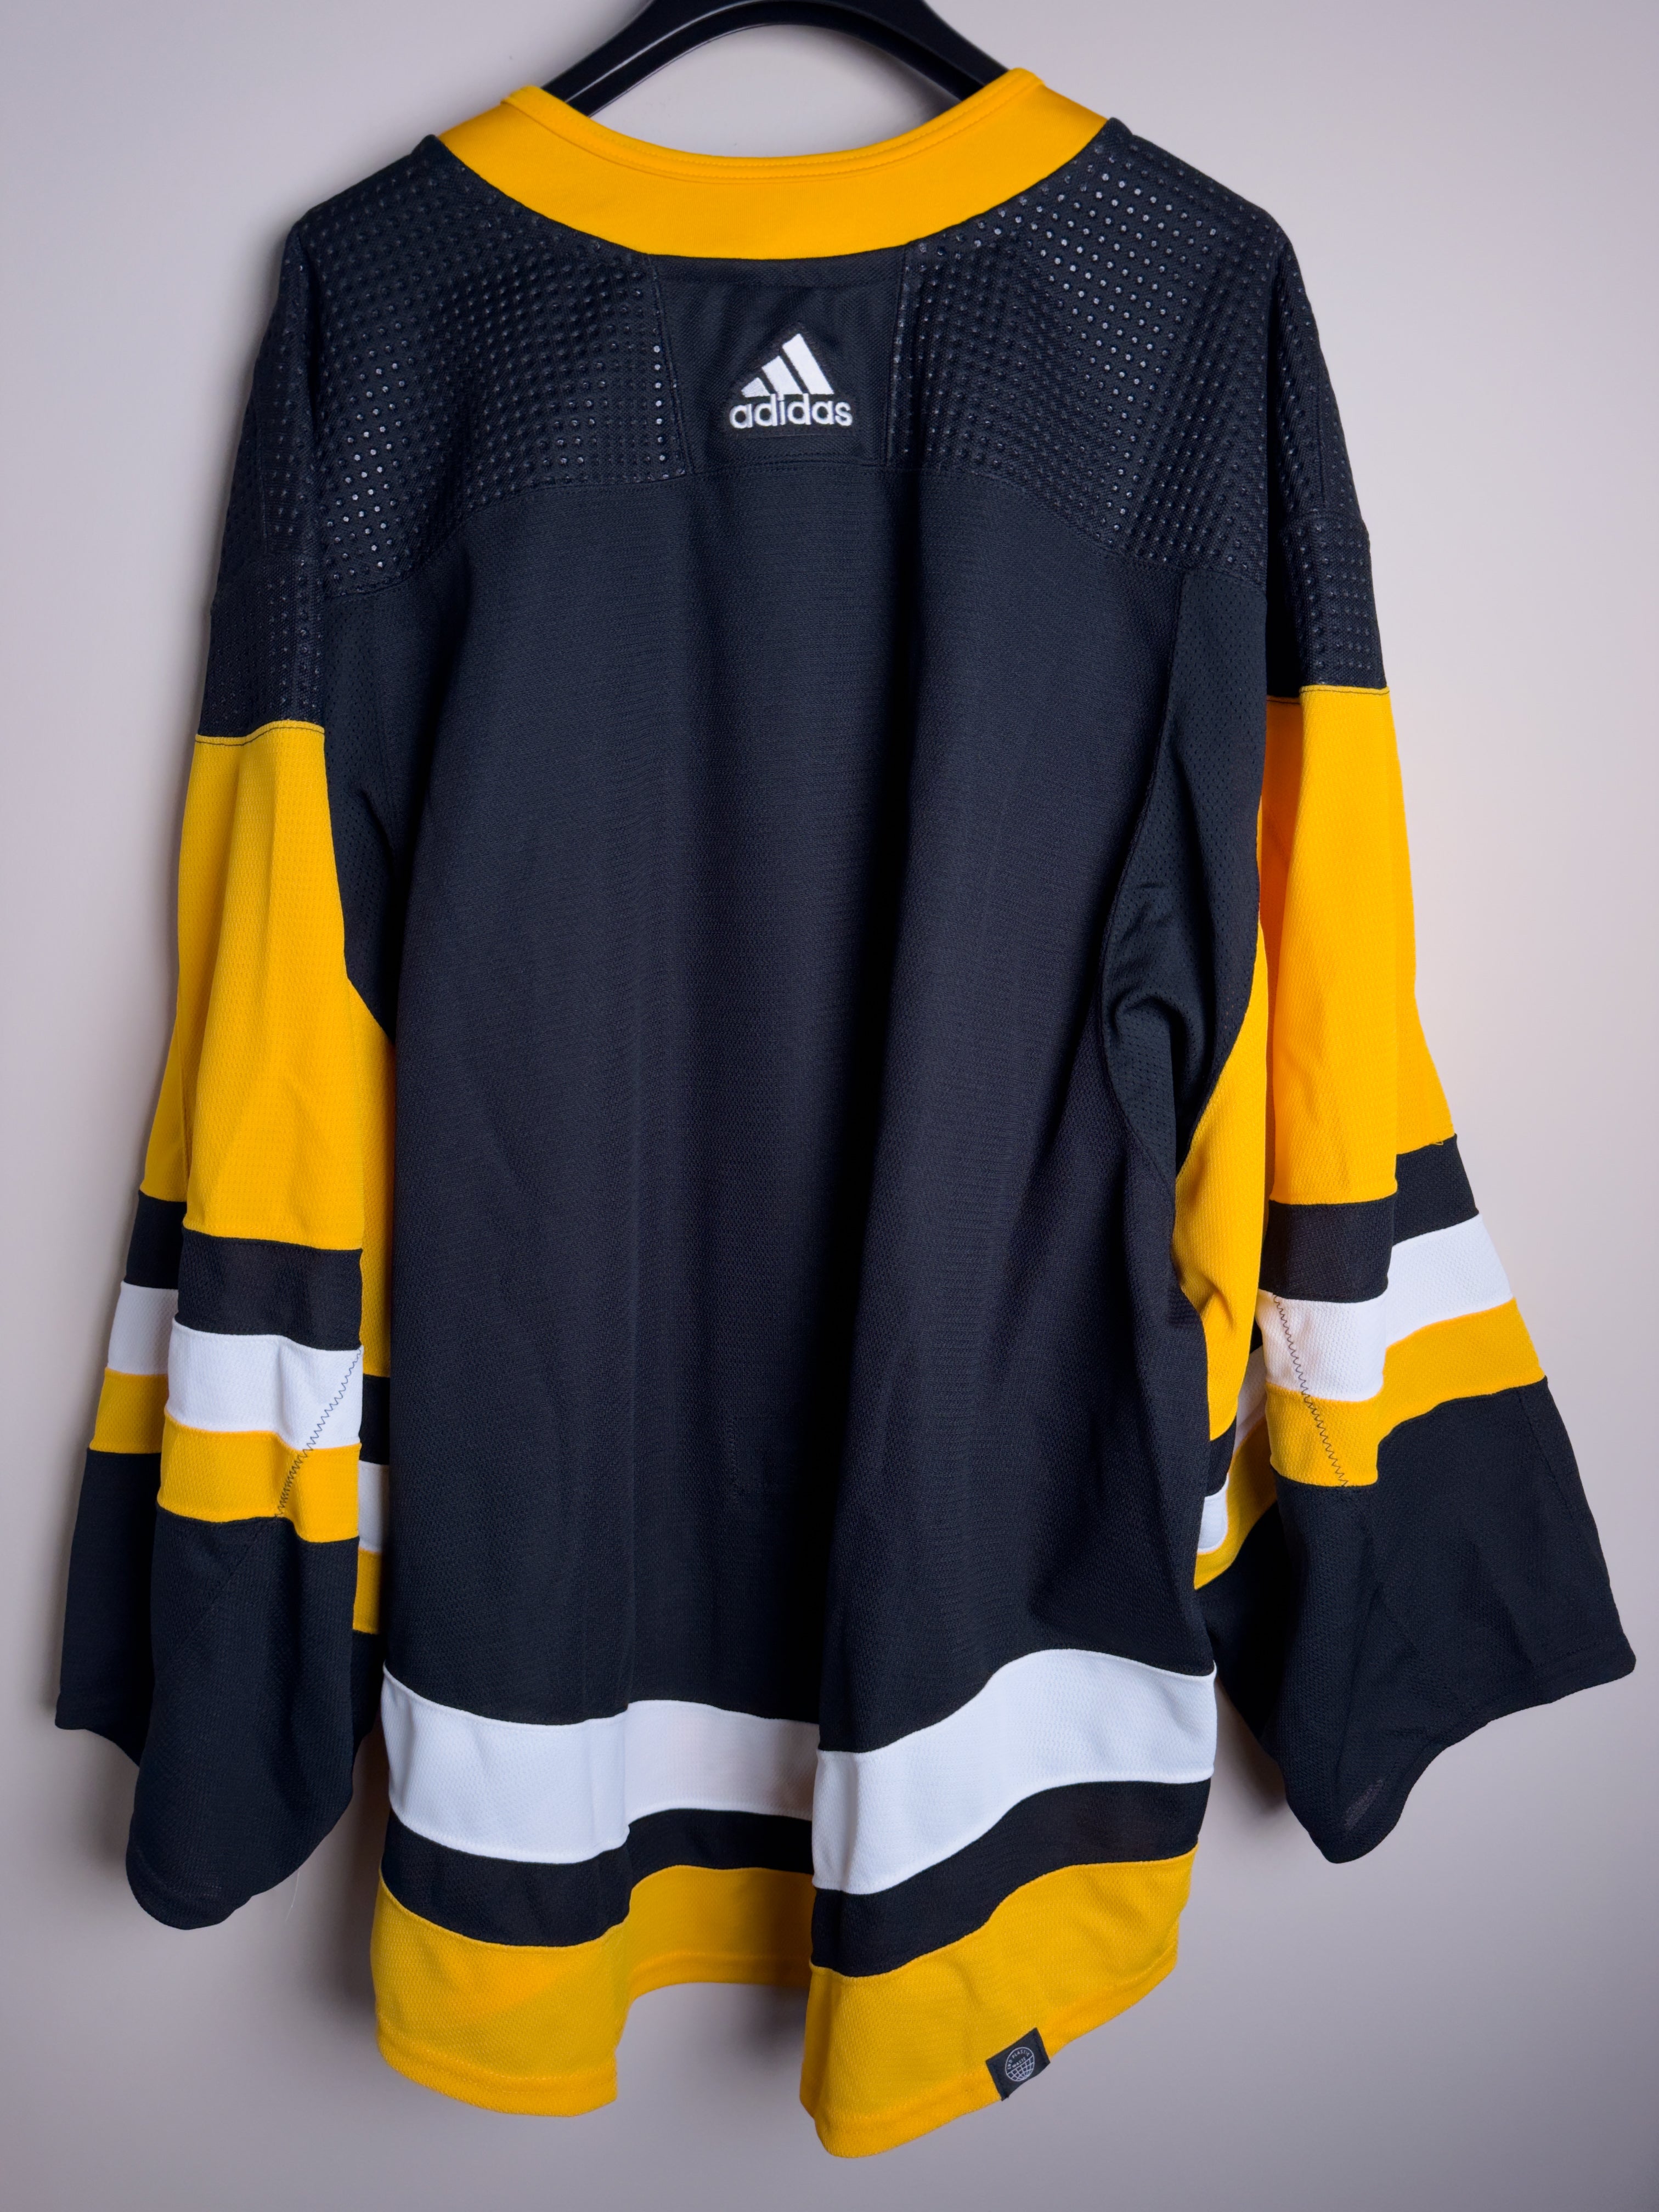 Pittsburgh Penguins NHL Adidas MiC Team Issued Home Jersey Size 60G (Goalie Cut)